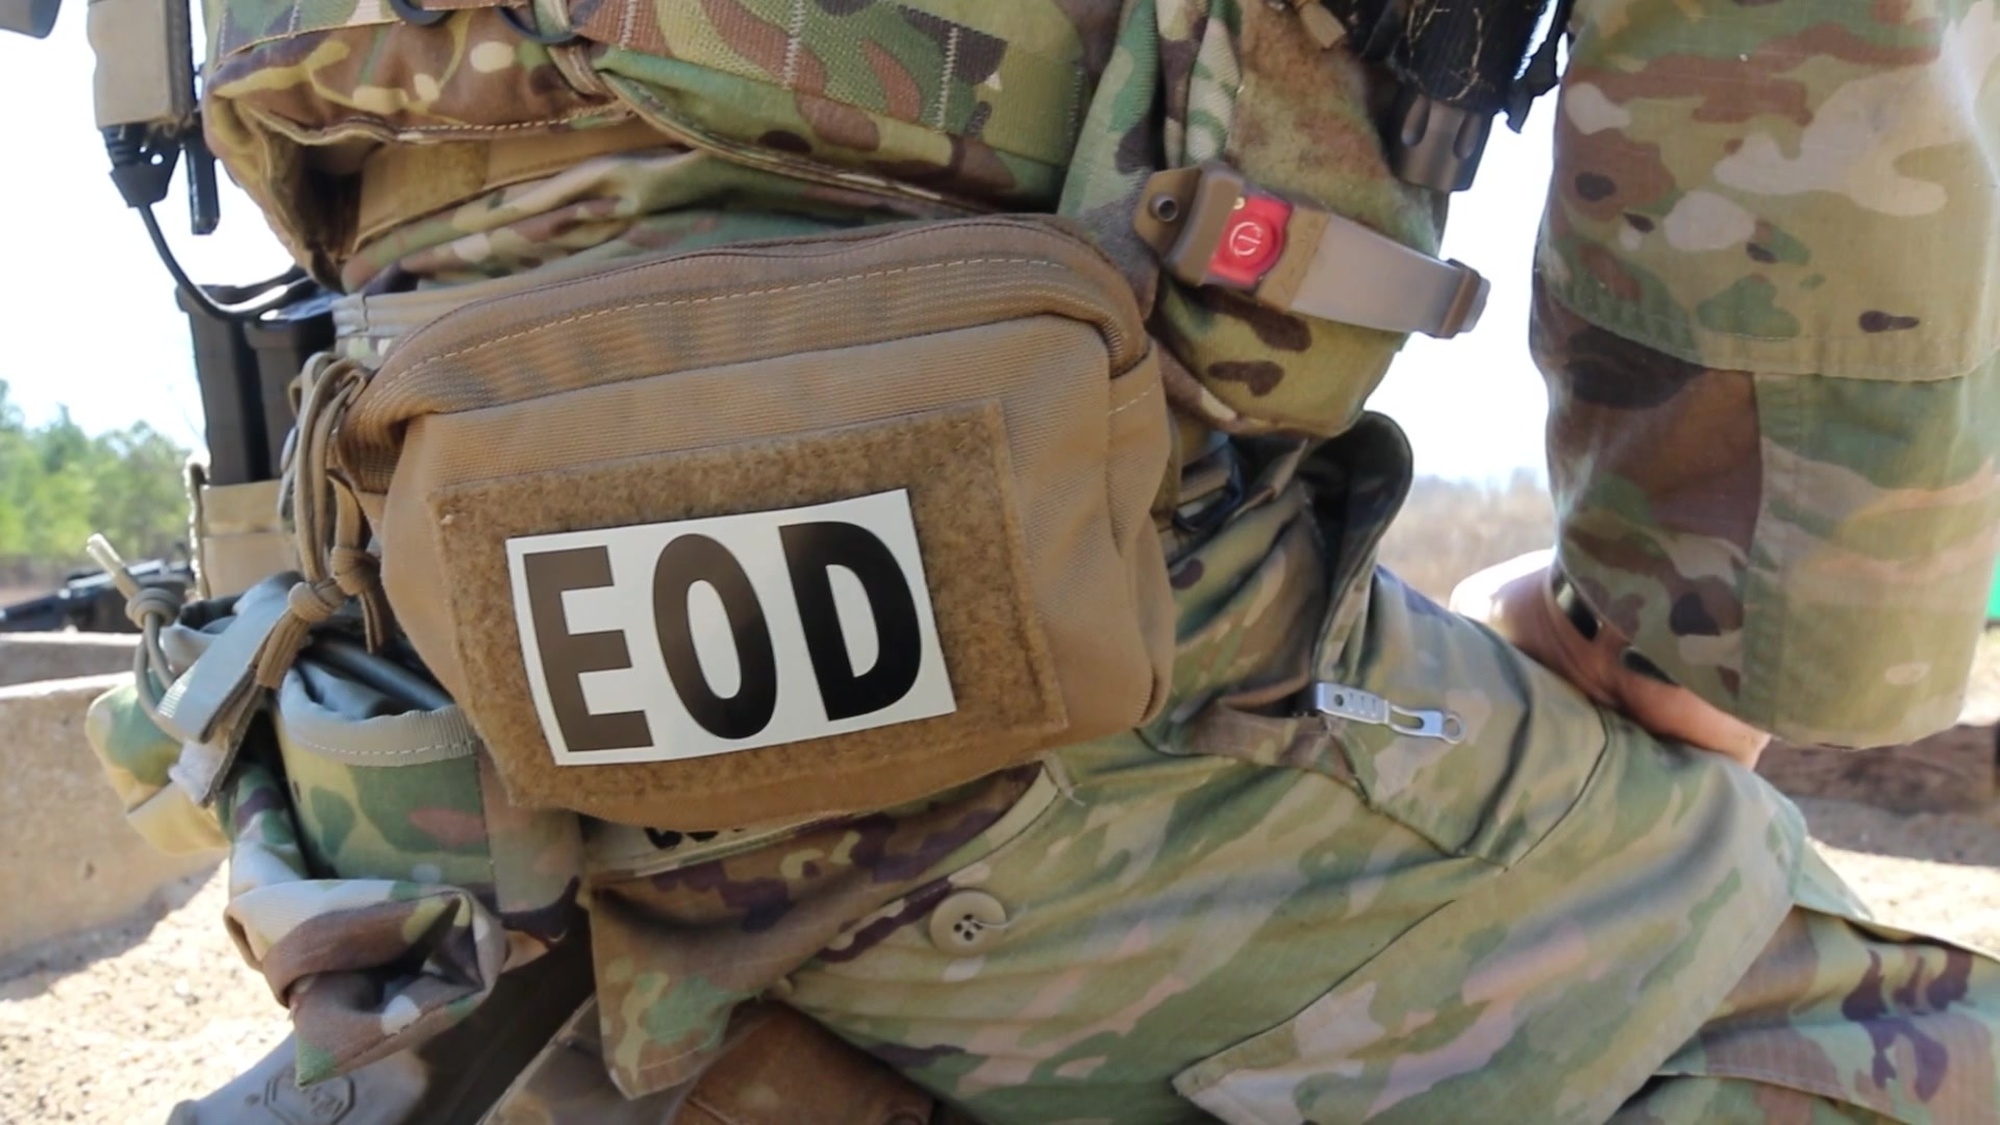 Have you got what it takes to be EOD?

Go to https://goarmysof.com/eod/eodrecruiting.html, call our recruiters at 910-432-1818, text 89D to 462-769, or email Special Operations Recruiting Battalion, U.S.Army@GoArmySOF/GoArmySOF.com to get your application!